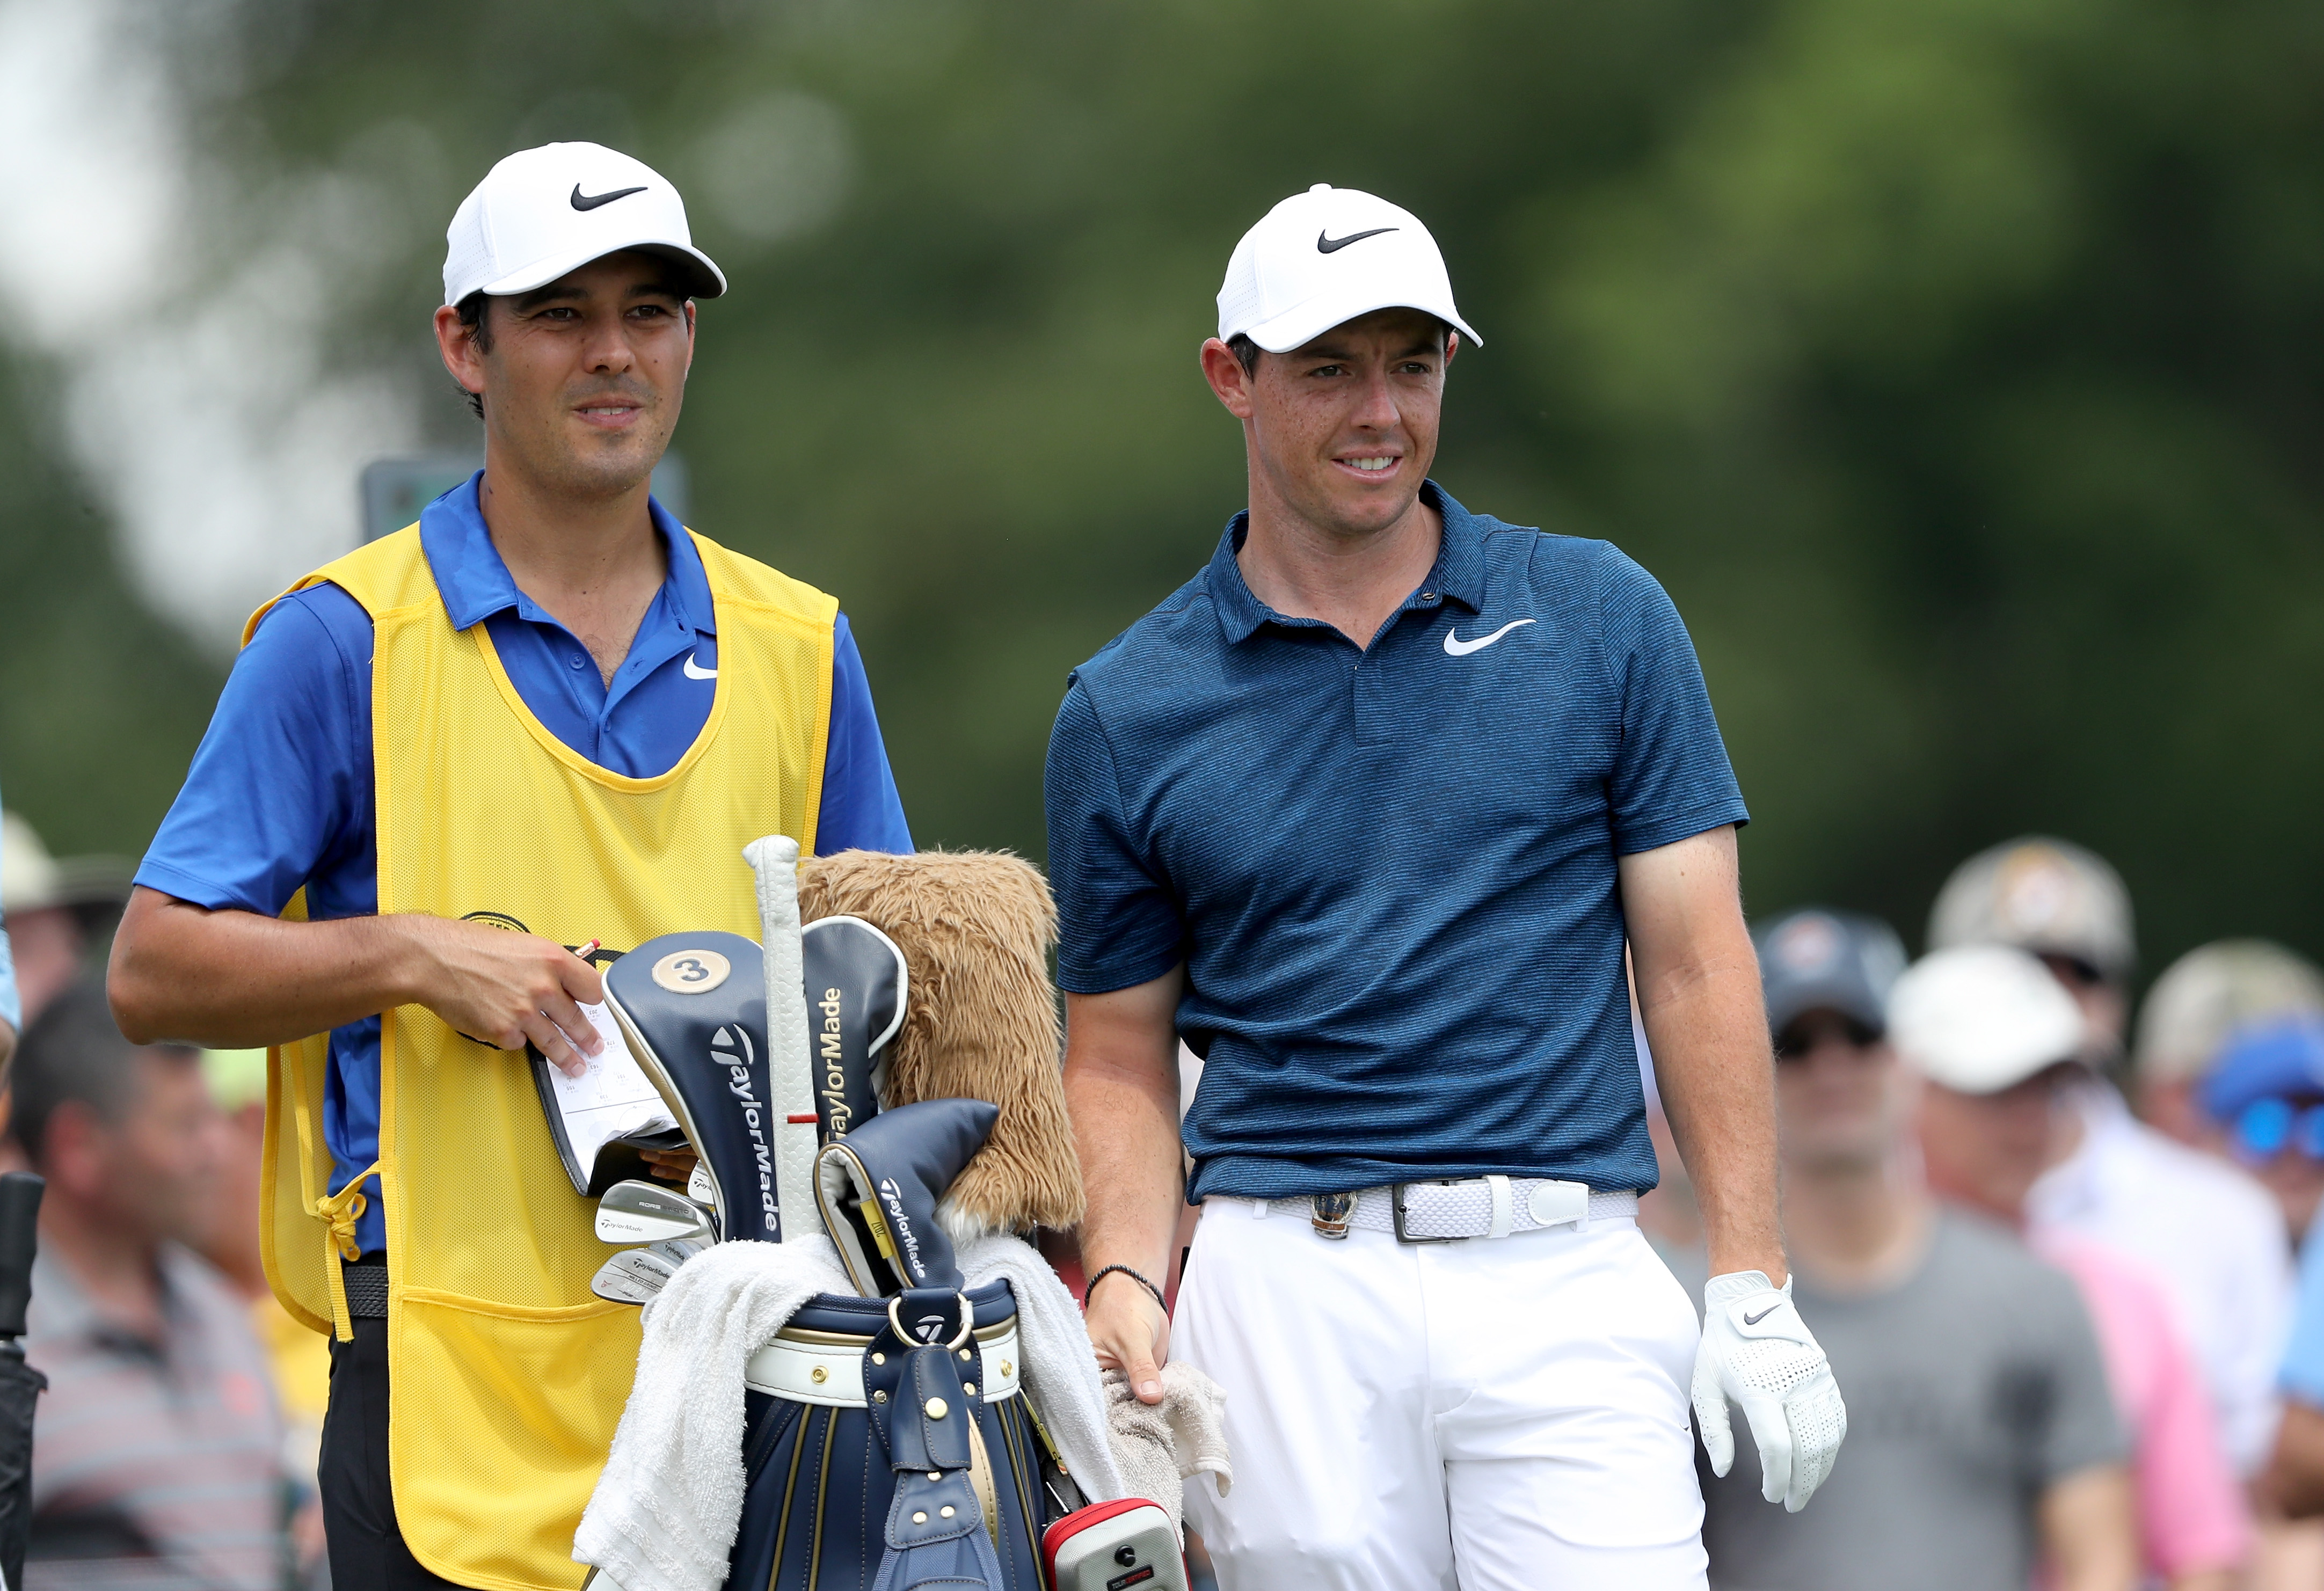 Rory McIlroy receives hilarious caddie application